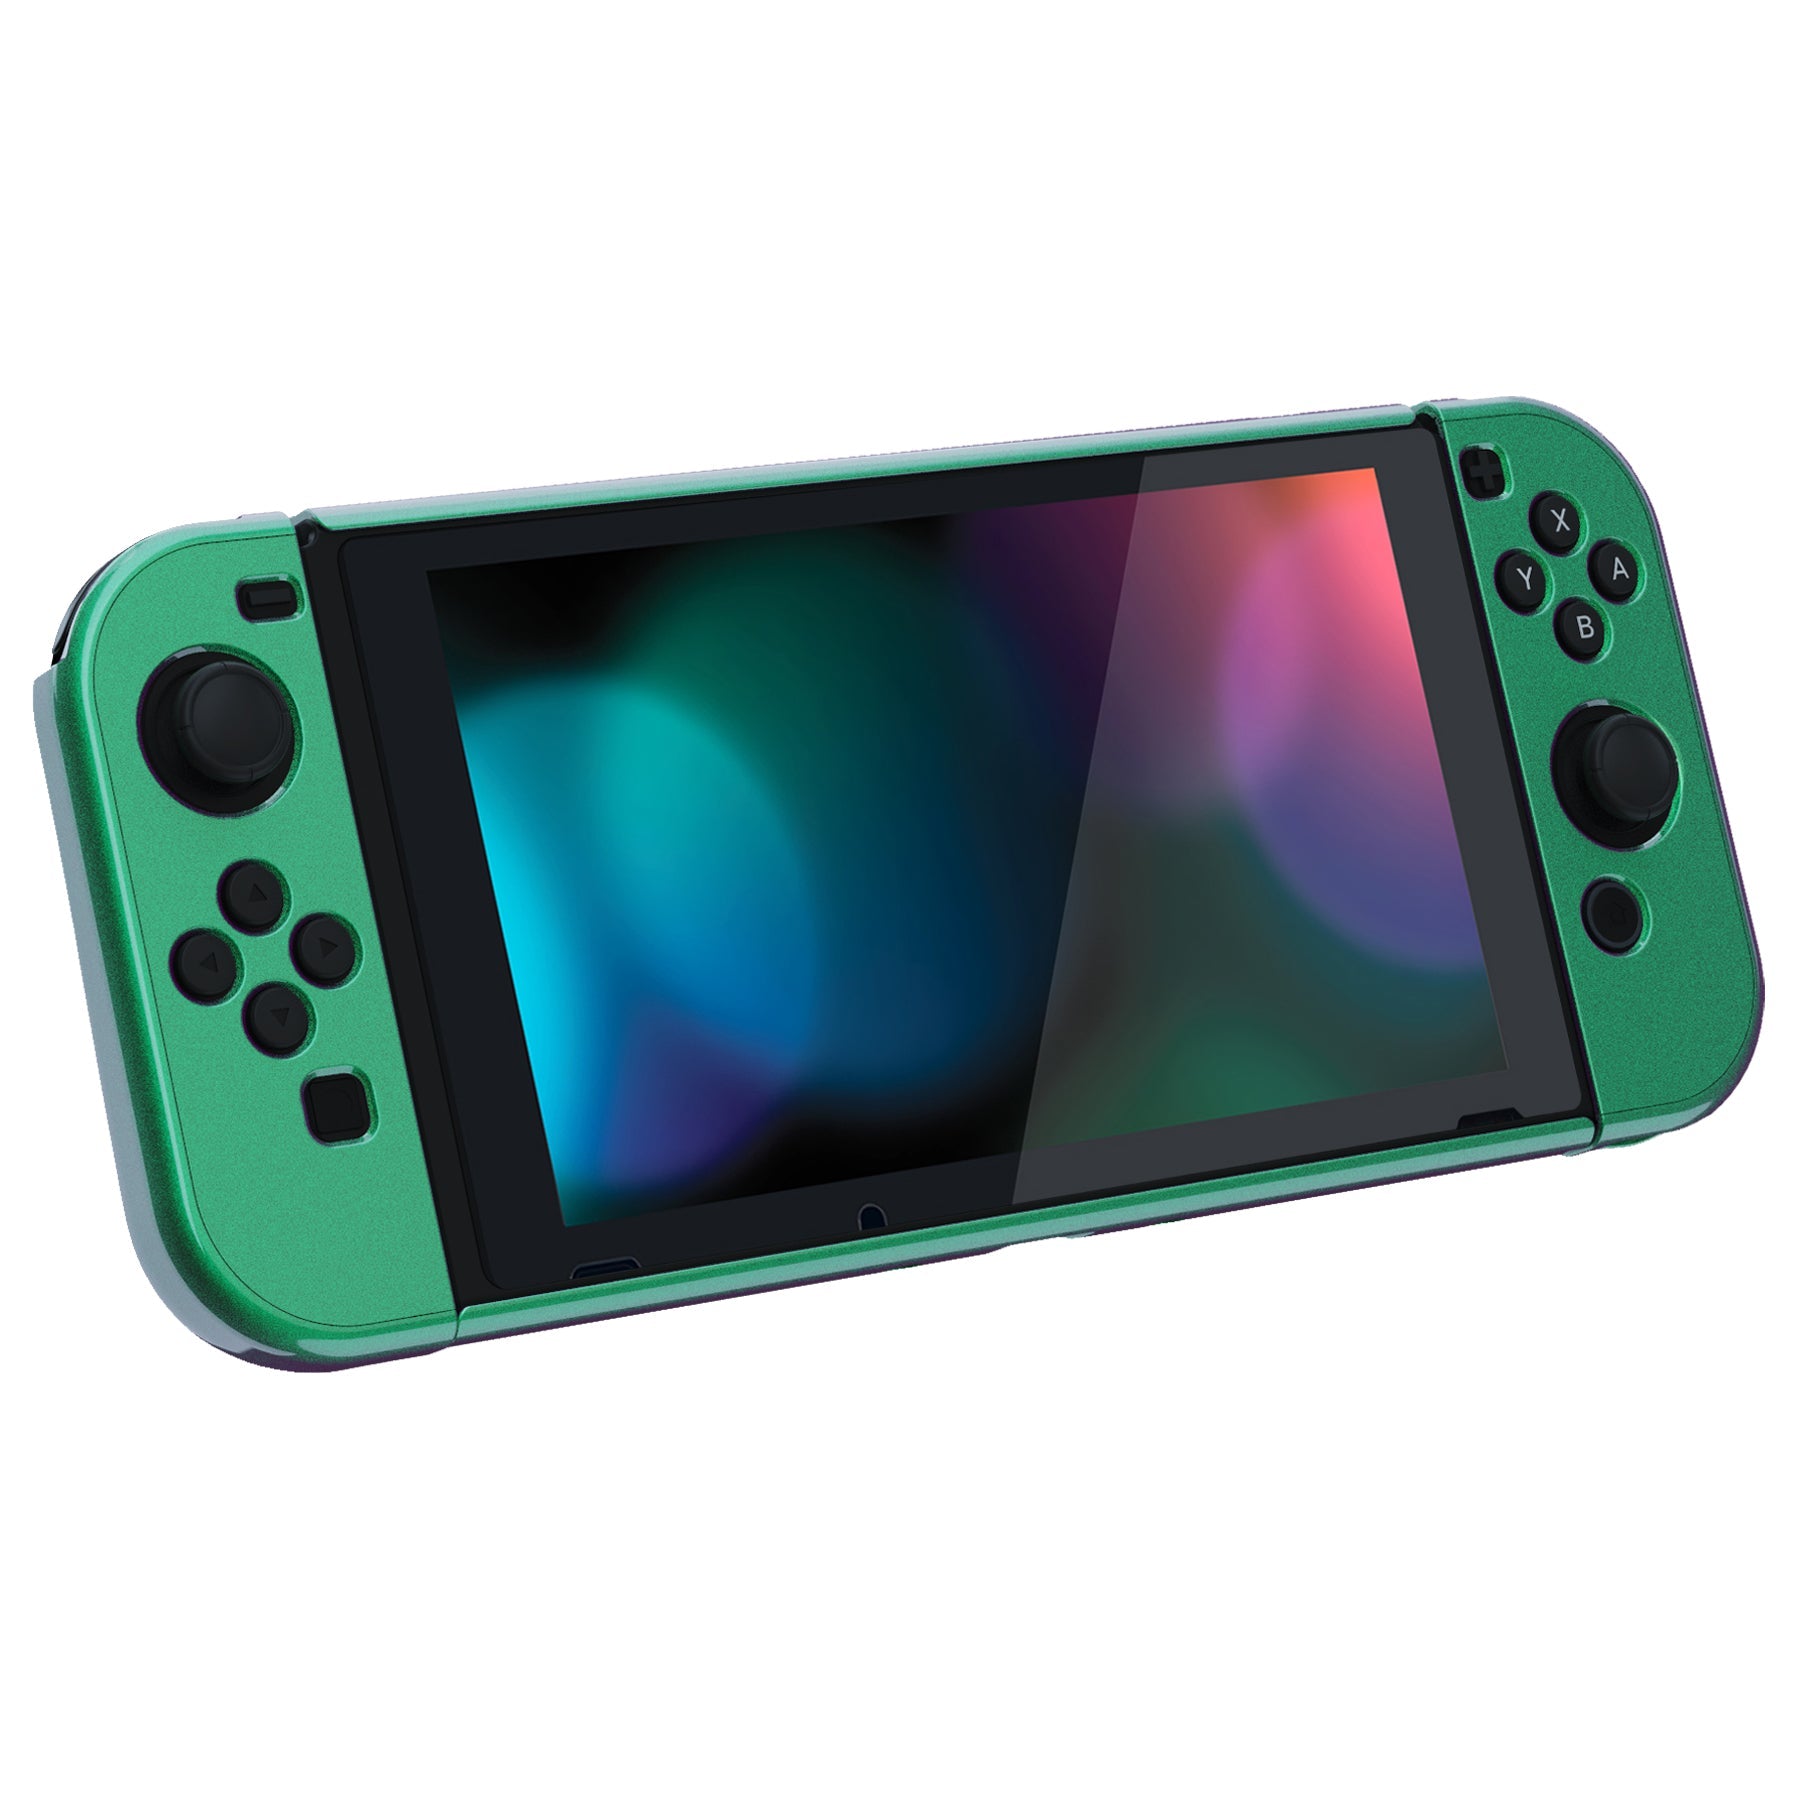 PlayVital UPGRADED Glossy Dockable Case Grip Cover for NS Switch, Ergonomic Protective Case for NS Switch, Separable Protector Hard Shell for Joycon - Chameleon Green Purple - ANSP3002 PlayVital